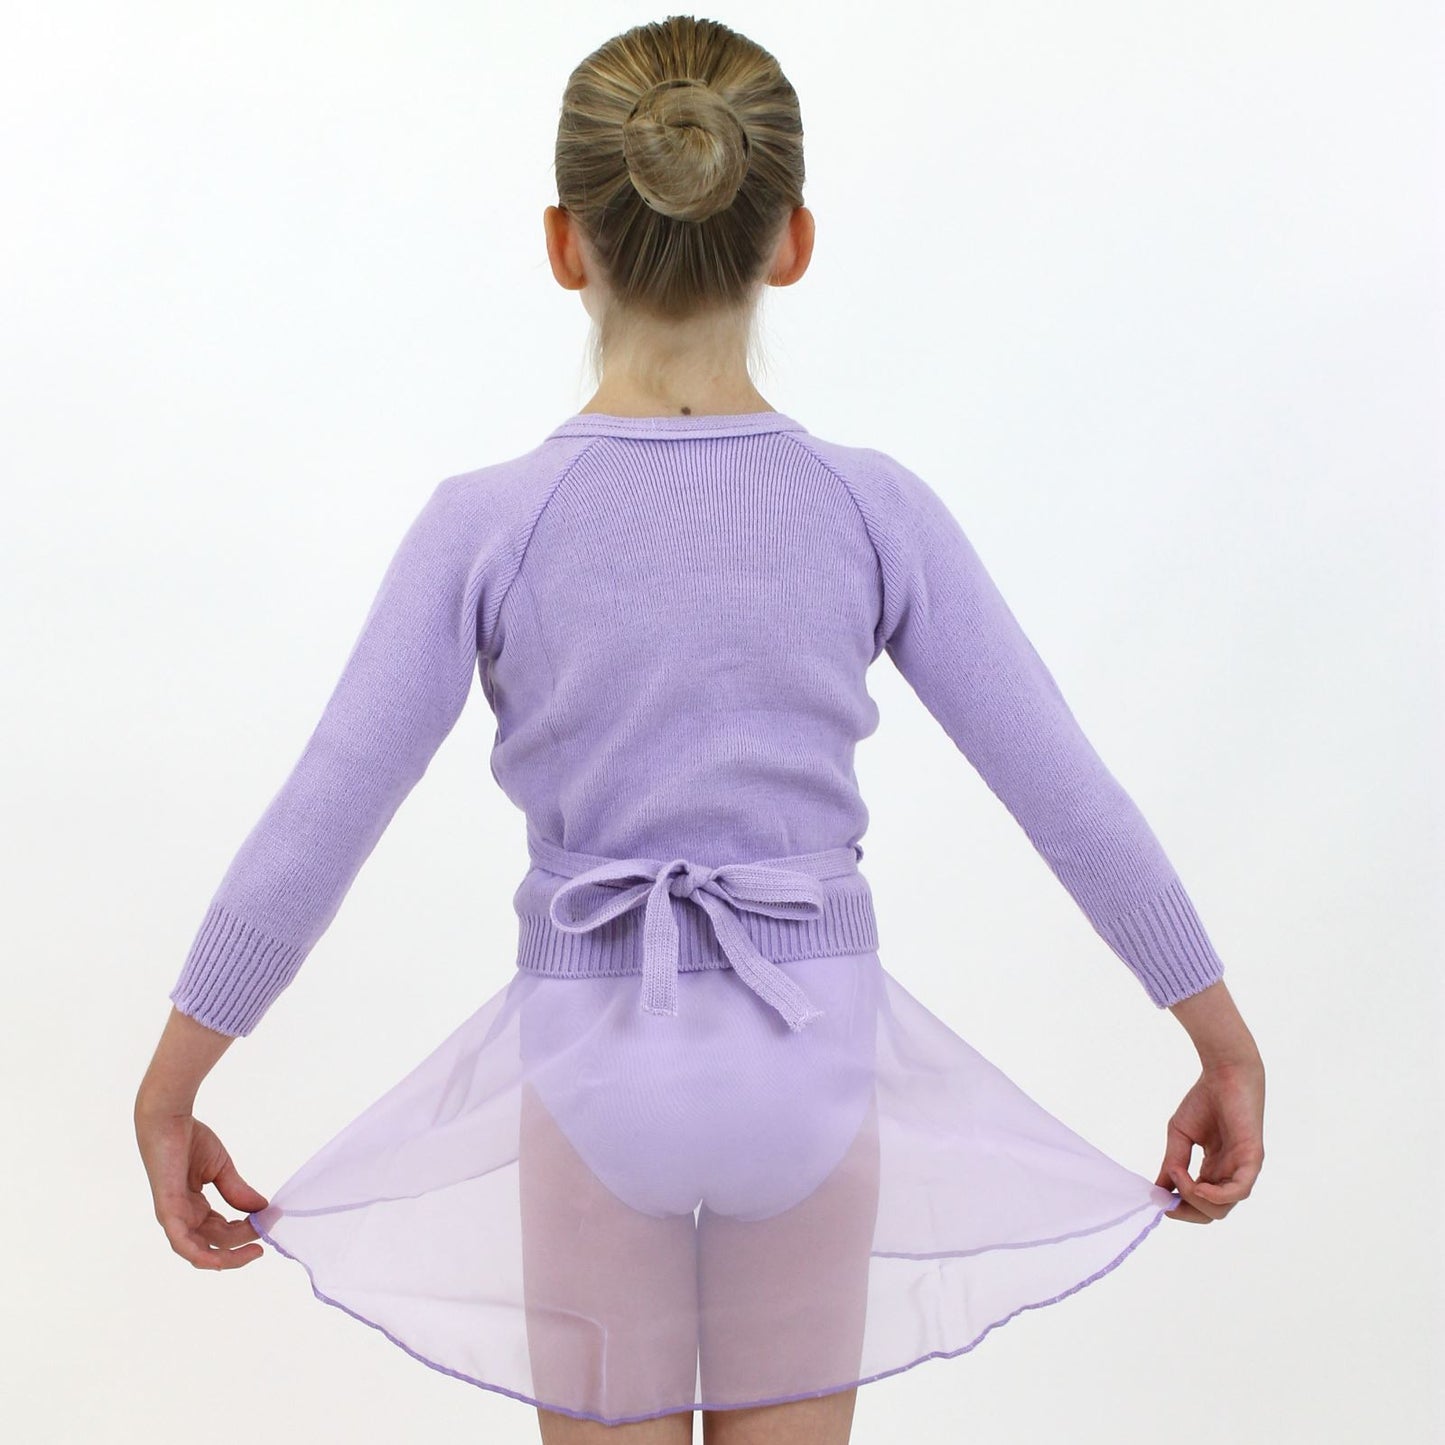 KNITTED ACRYLIC CROSSOVER BALLET / ICE SKATING CARDIGAN Knitwear Dancers World Lilac 22" chest 